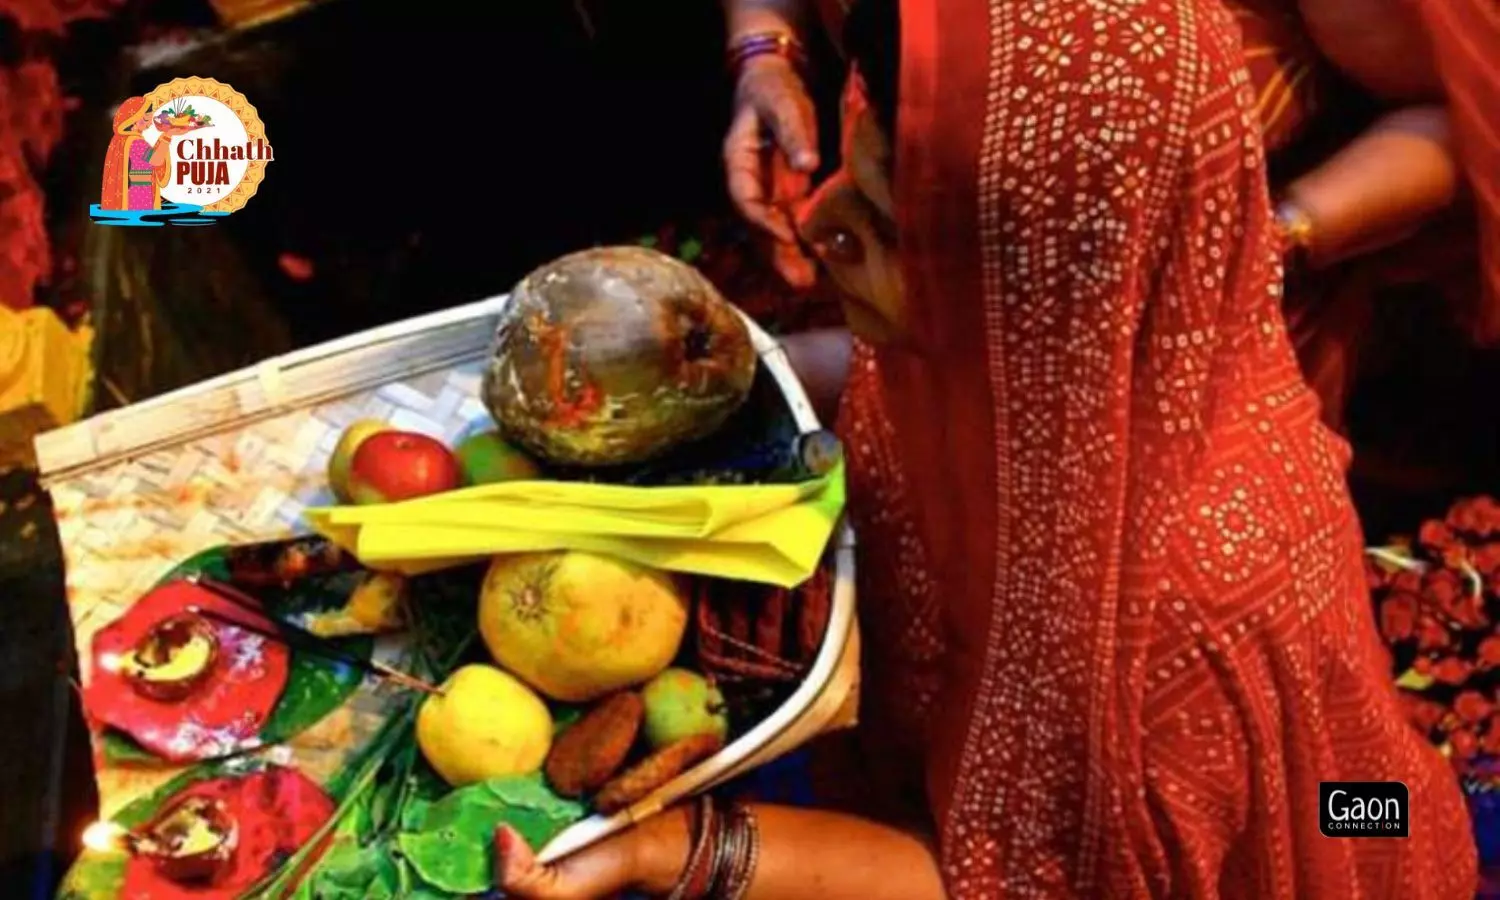 Chhath Puja in Images